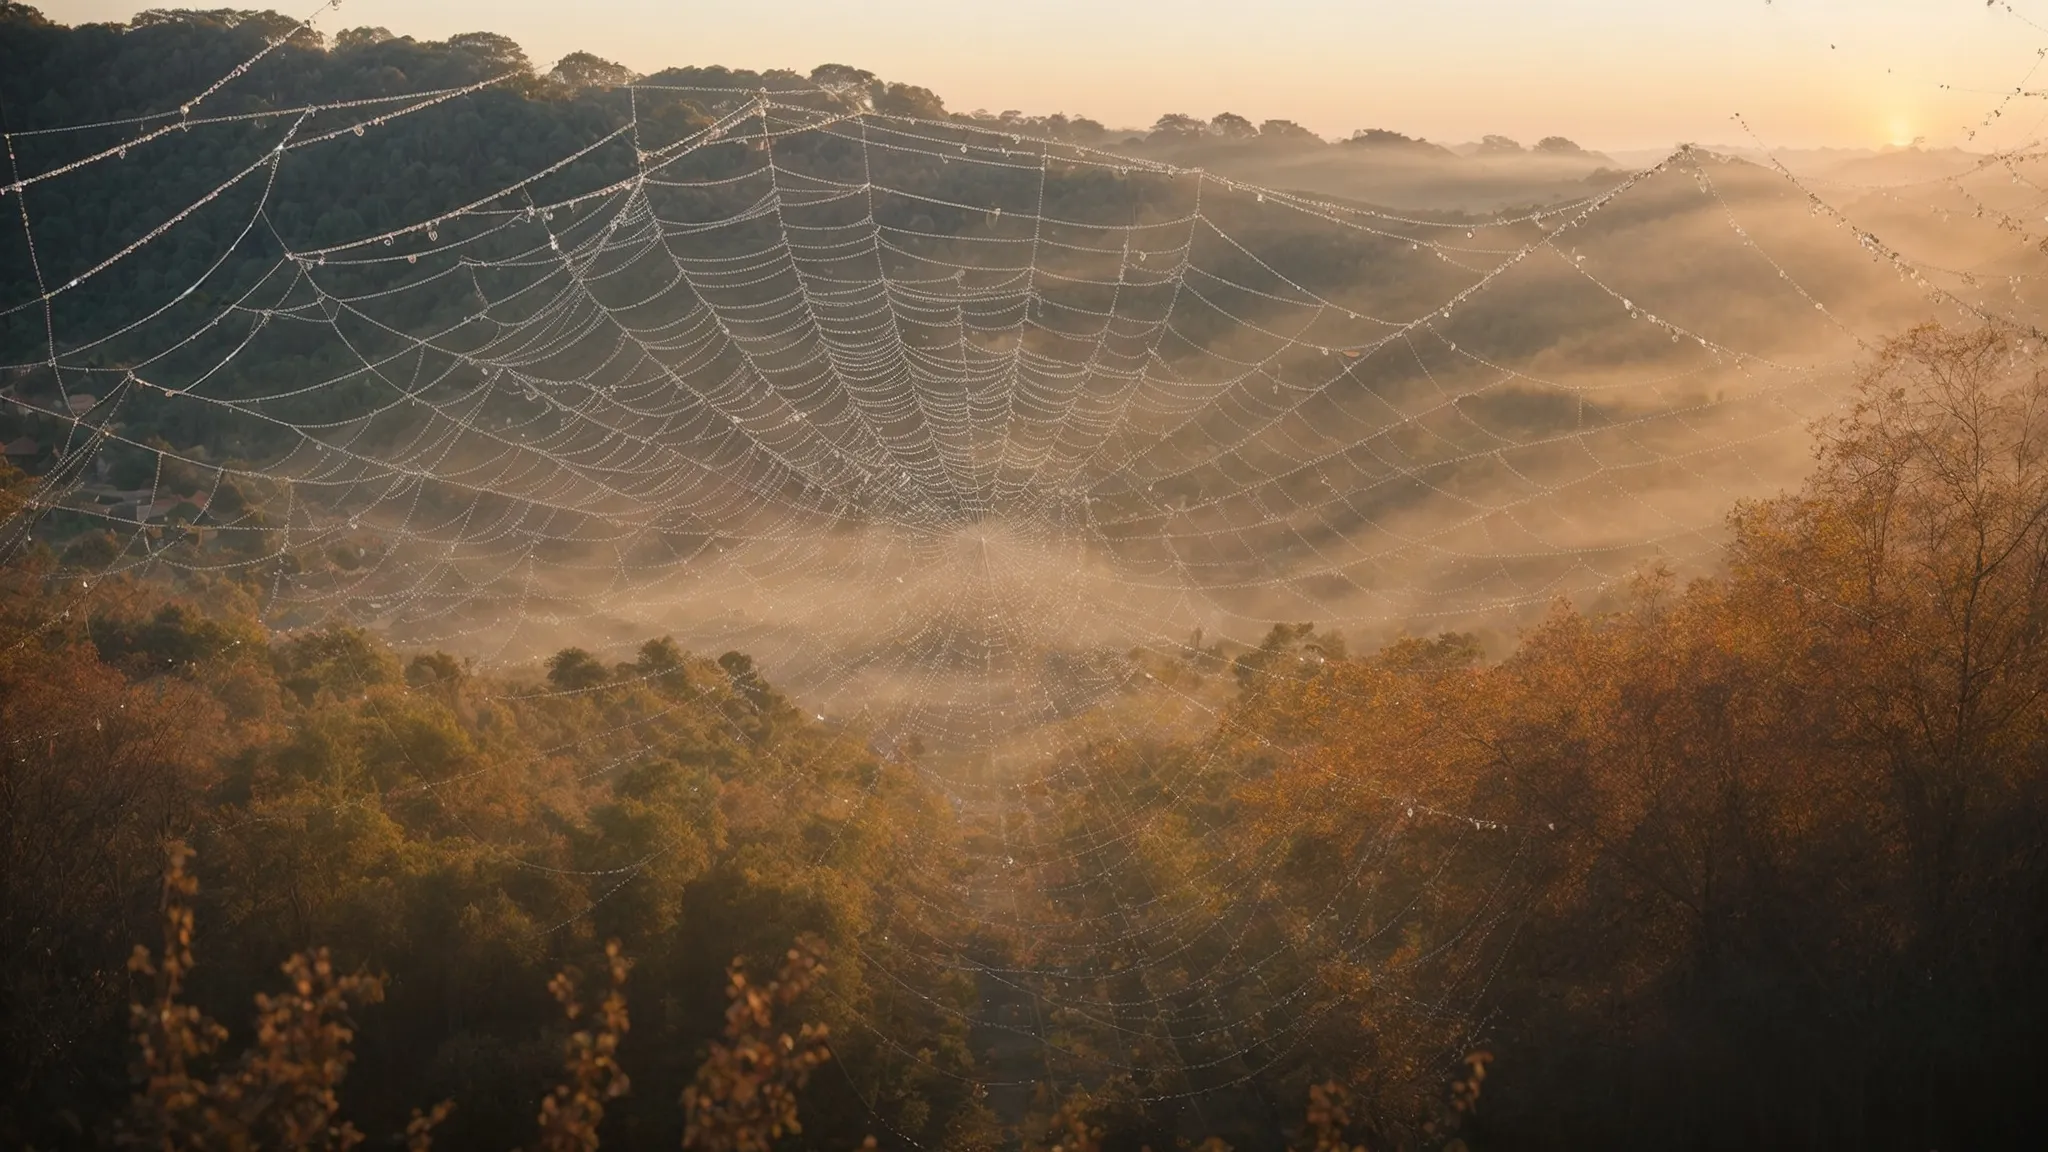 a panoramic view of a vast network of interconnected spiderwebs glittering with dew in the soft light of dawn.